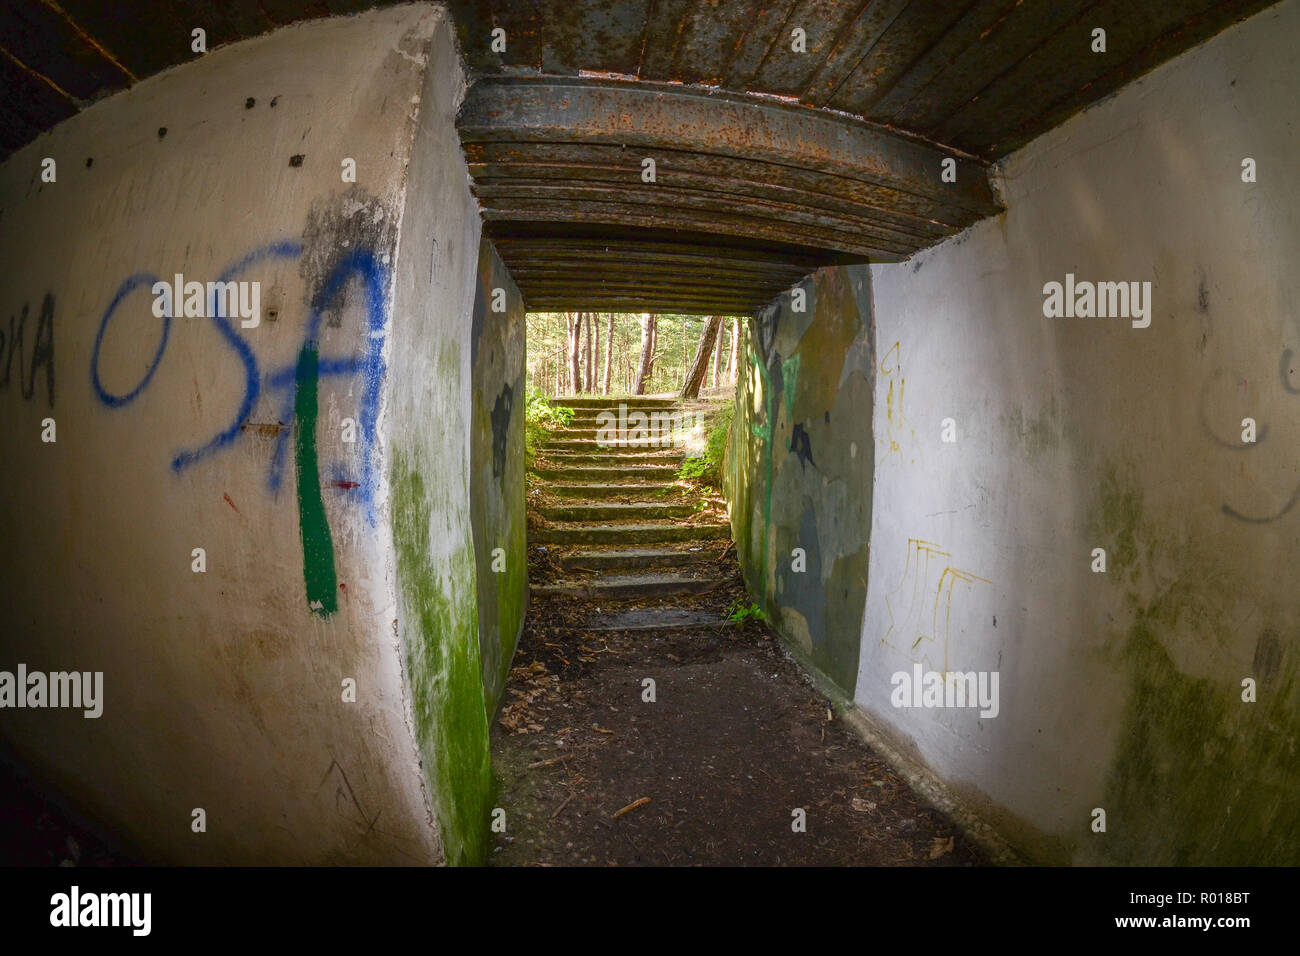 Abandoned and devastated interior of Cold War coastal defence fortification in Hel, Poland. Stock Photo